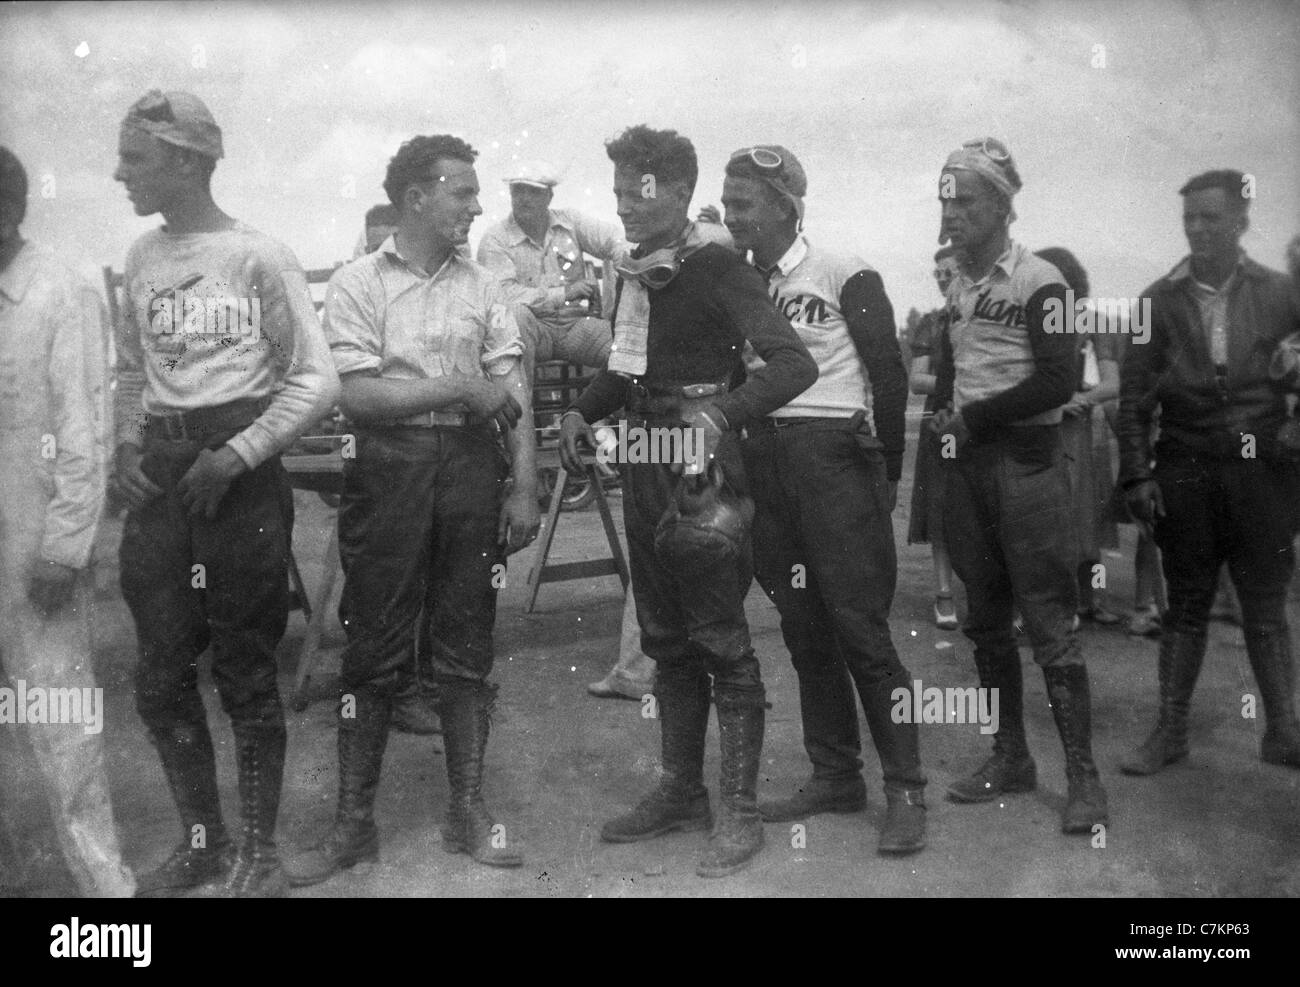 1930s motorcycle race Americana racers dressed men group fashion men's young males group Stock Photo